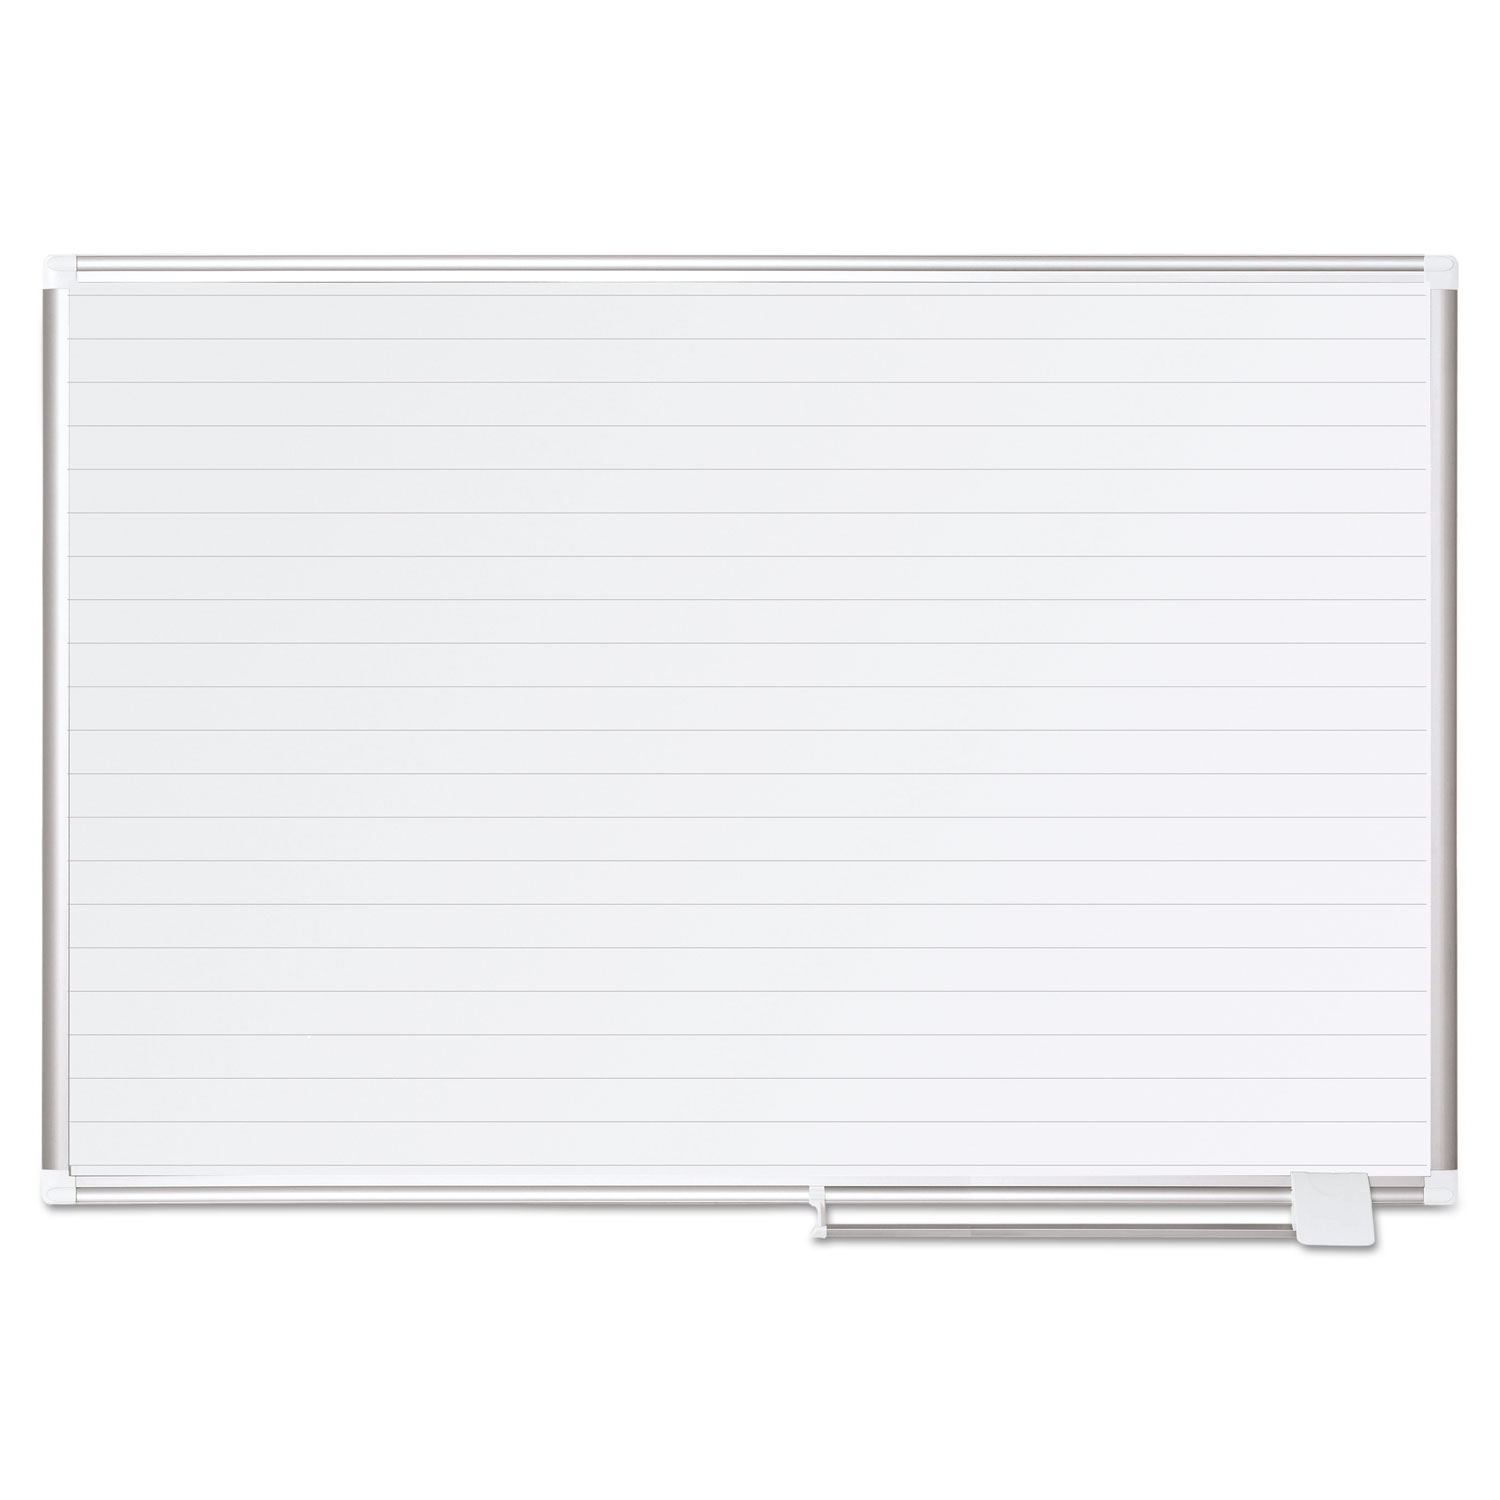  MasterVision MA0594830 Ruled Planning Board, 48 x 36, White/Silver (BVCMA0594830) 